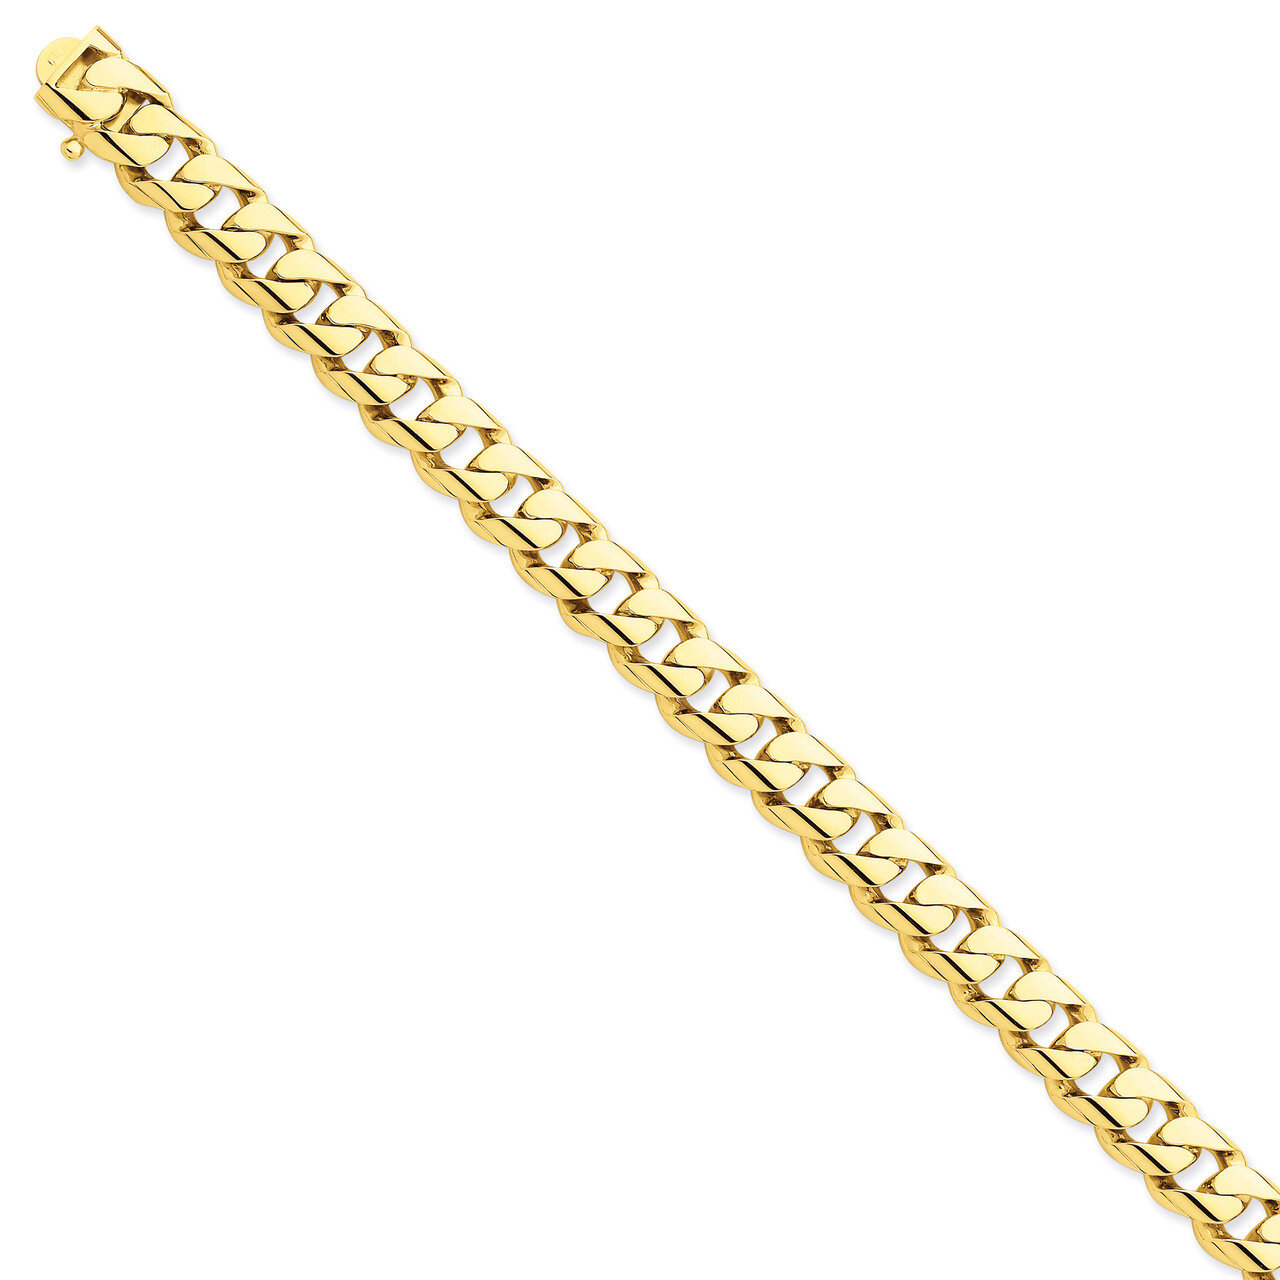 10mm Hand-polished Rounded Curb Chain 9 Inch 14k Gold LK126-9